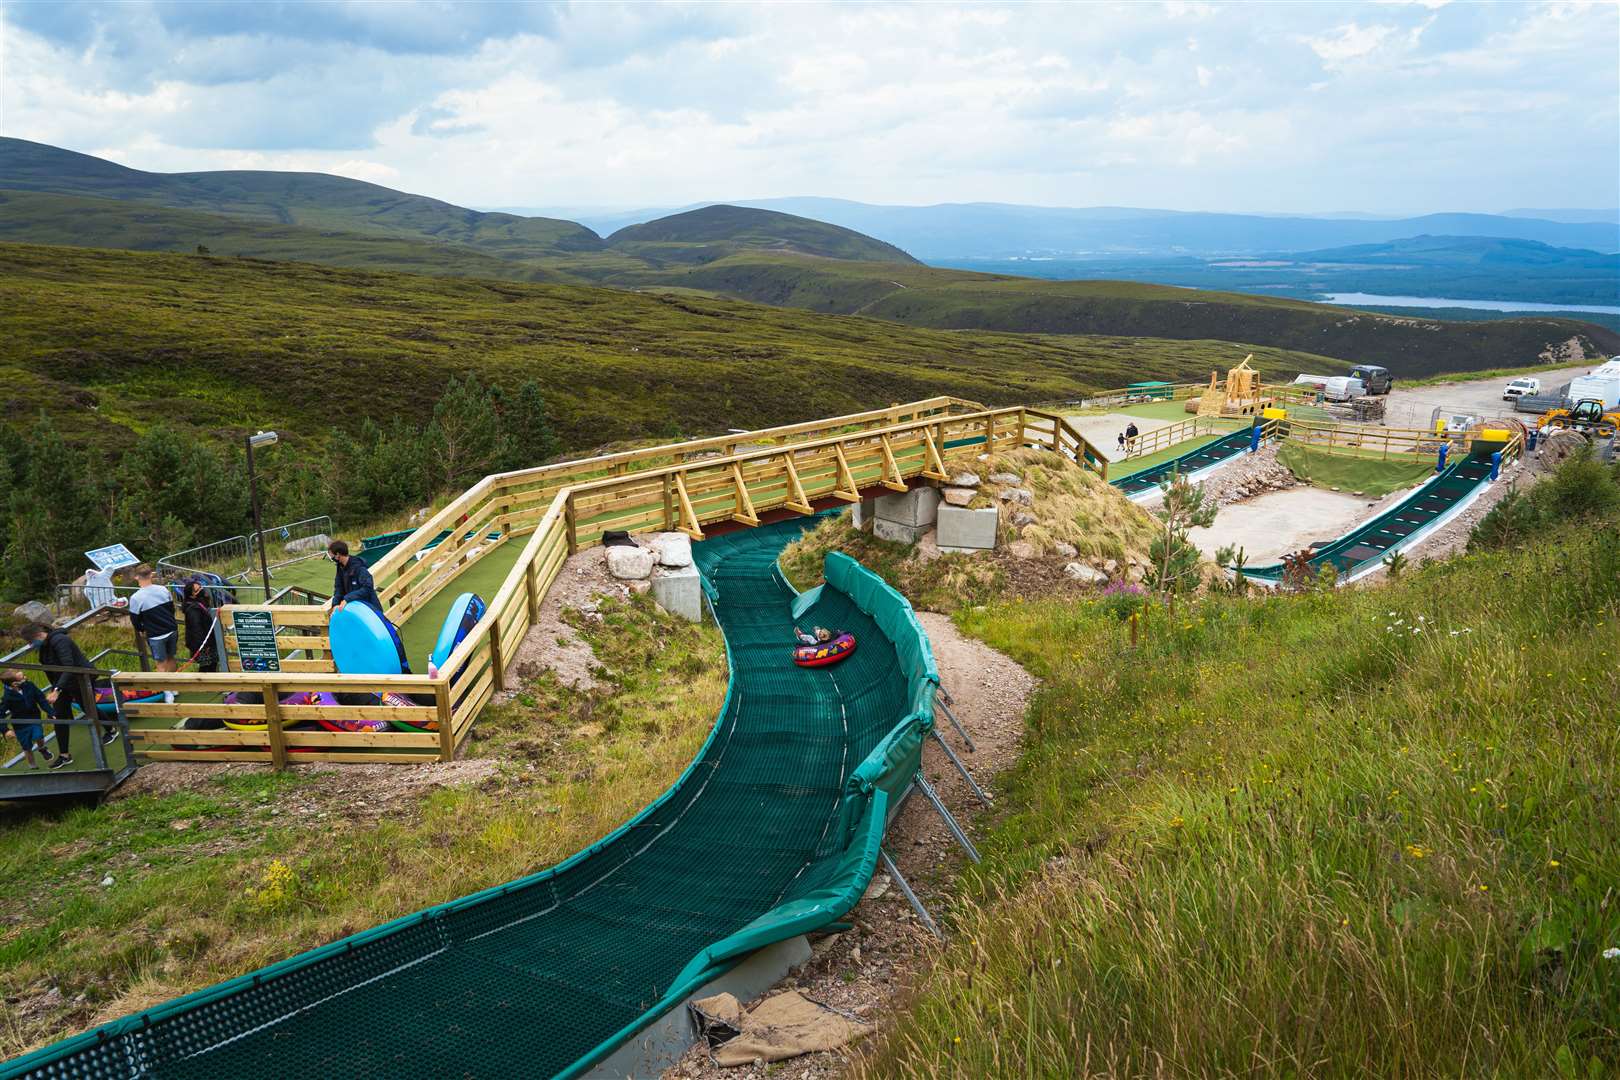 The temporary authorization expired this month for a tubular slide granted by Highland Council in 2019 and for two more slides in the same area agreed to last summer by the CNPA.